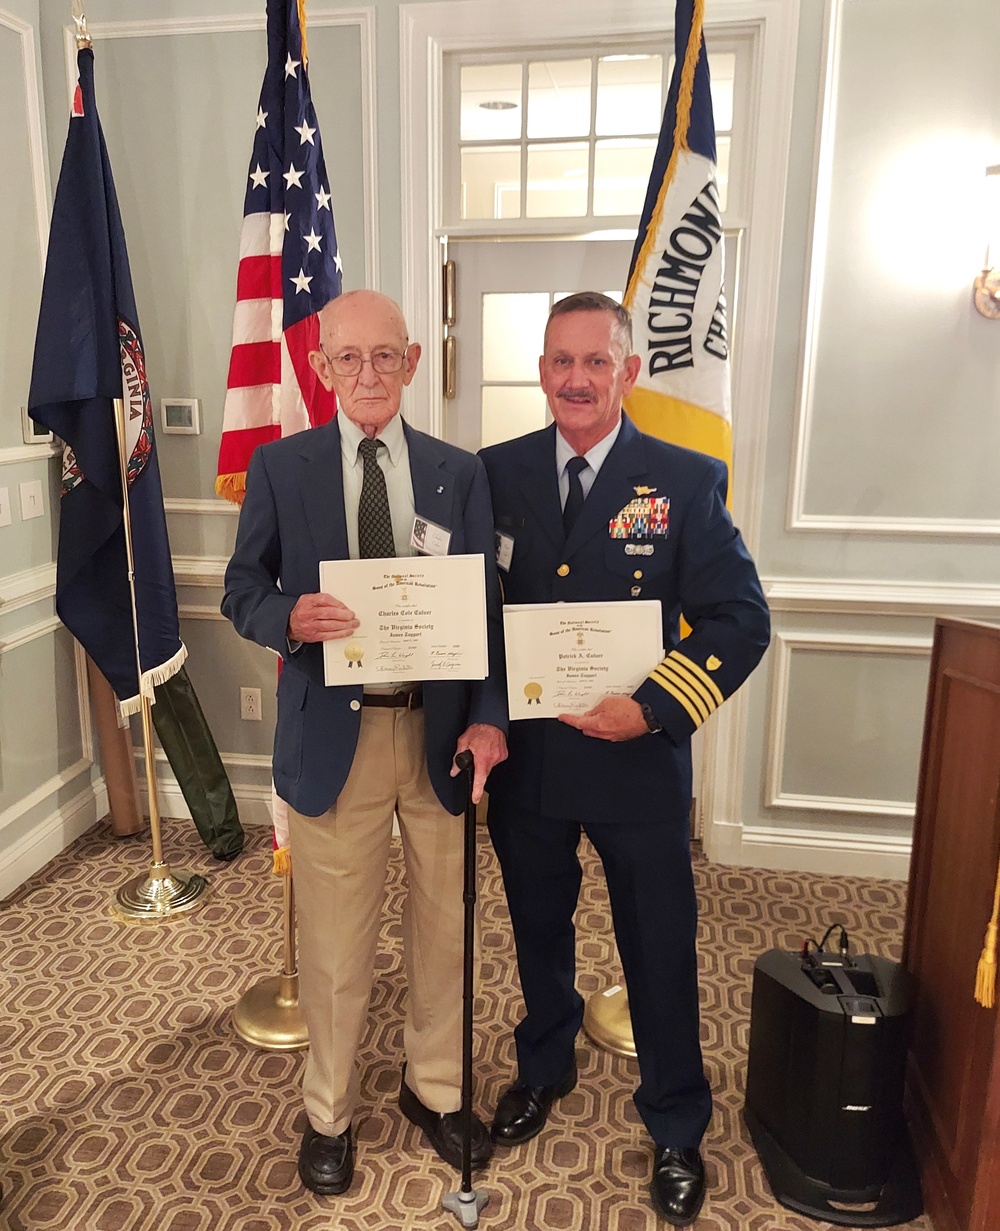 Coast Guard son joins father with Sons of the American Revolution dual membership